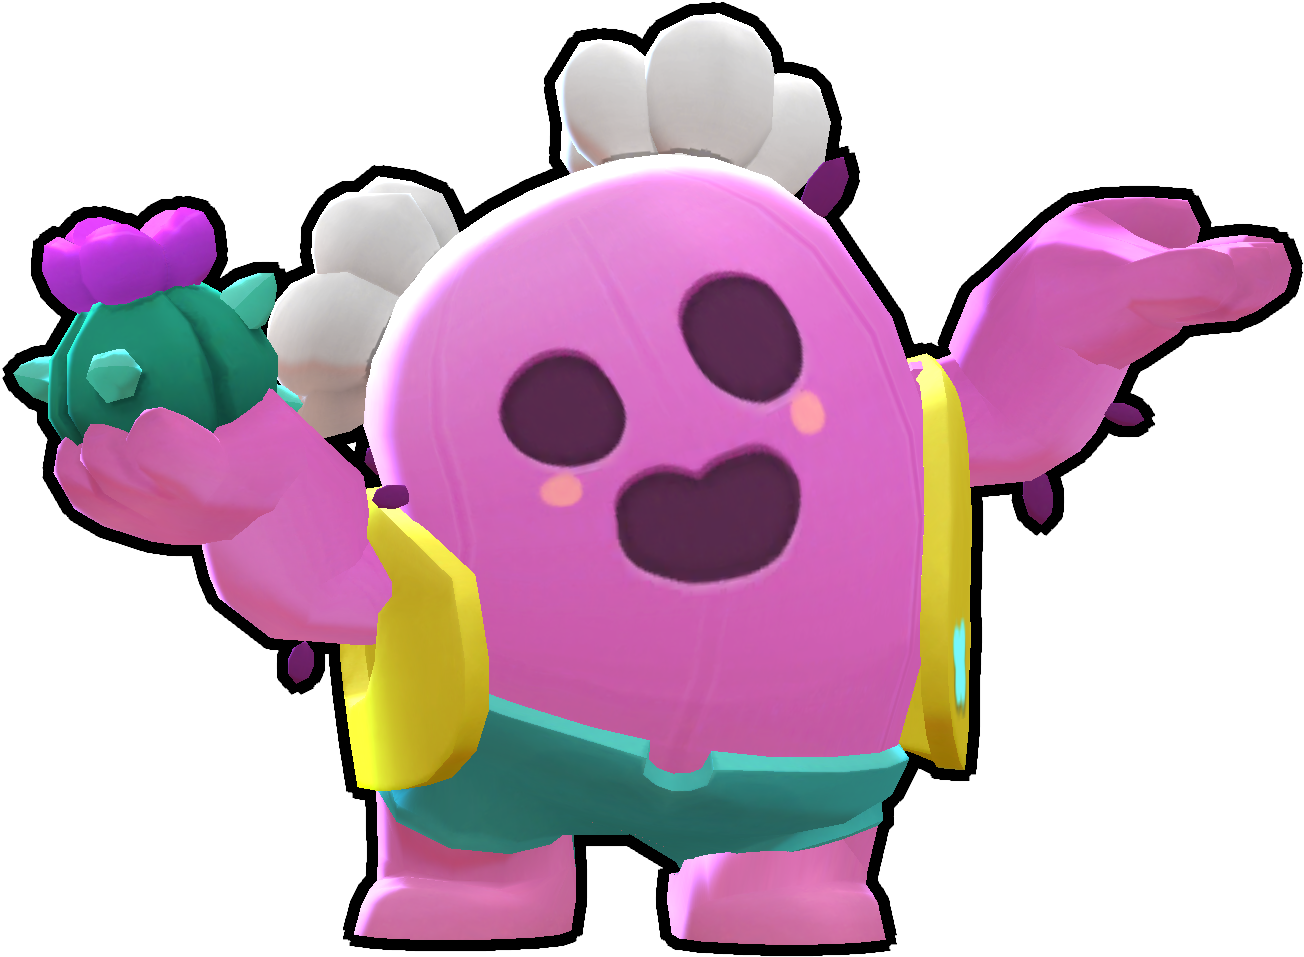 Download Spike Skin Pinky Spike Brawl Stars Png Image With